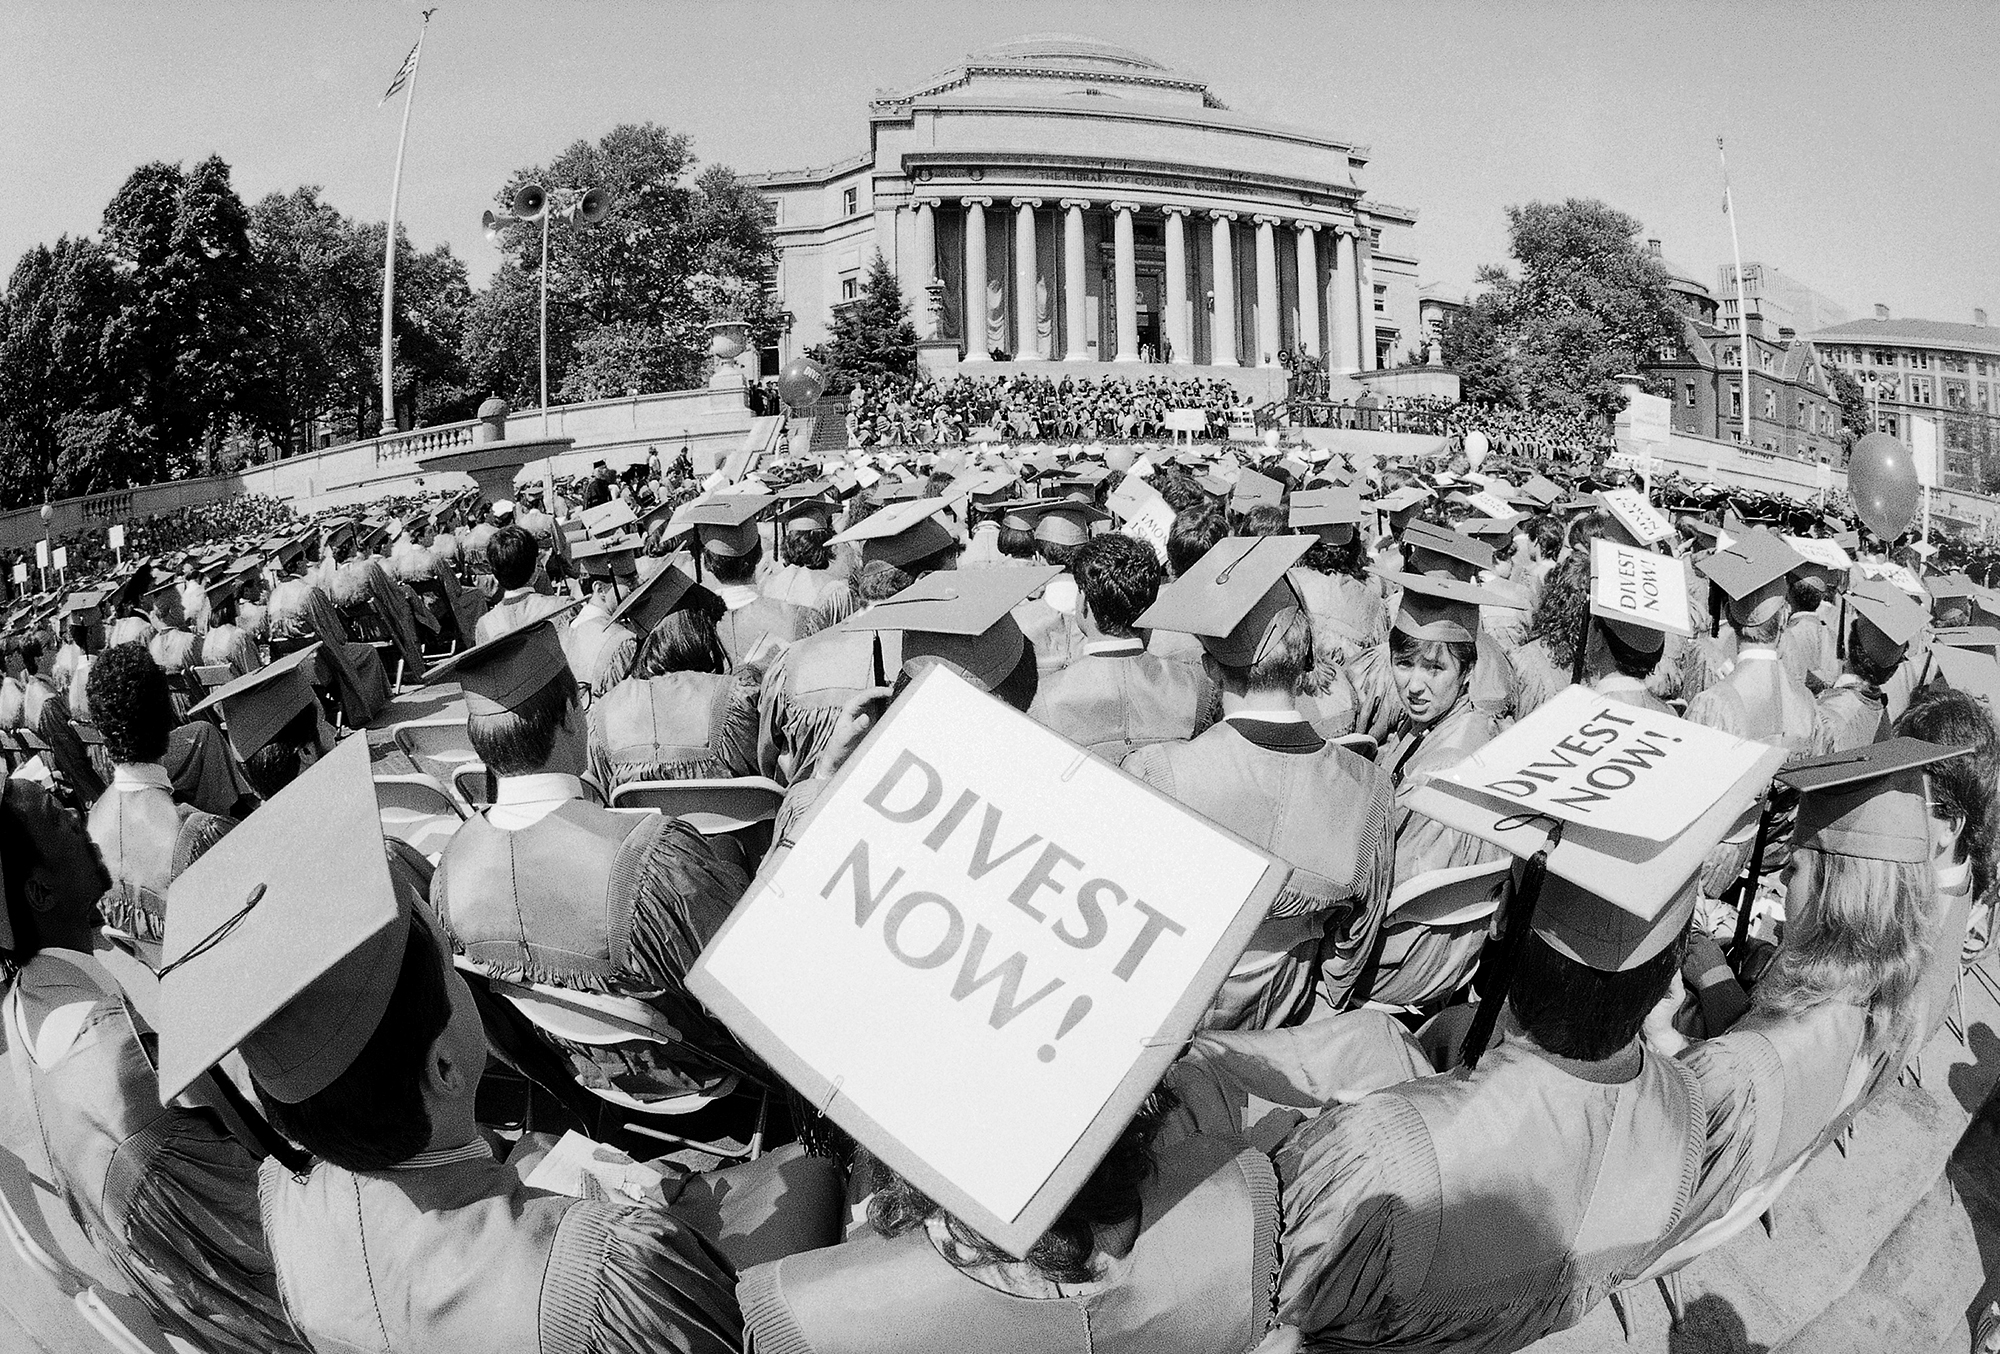 Some of the students graduating from New York's Columbia University use their motarboards to make known their views of the university's financing of companies operating in South Africa on May 15, 1985.